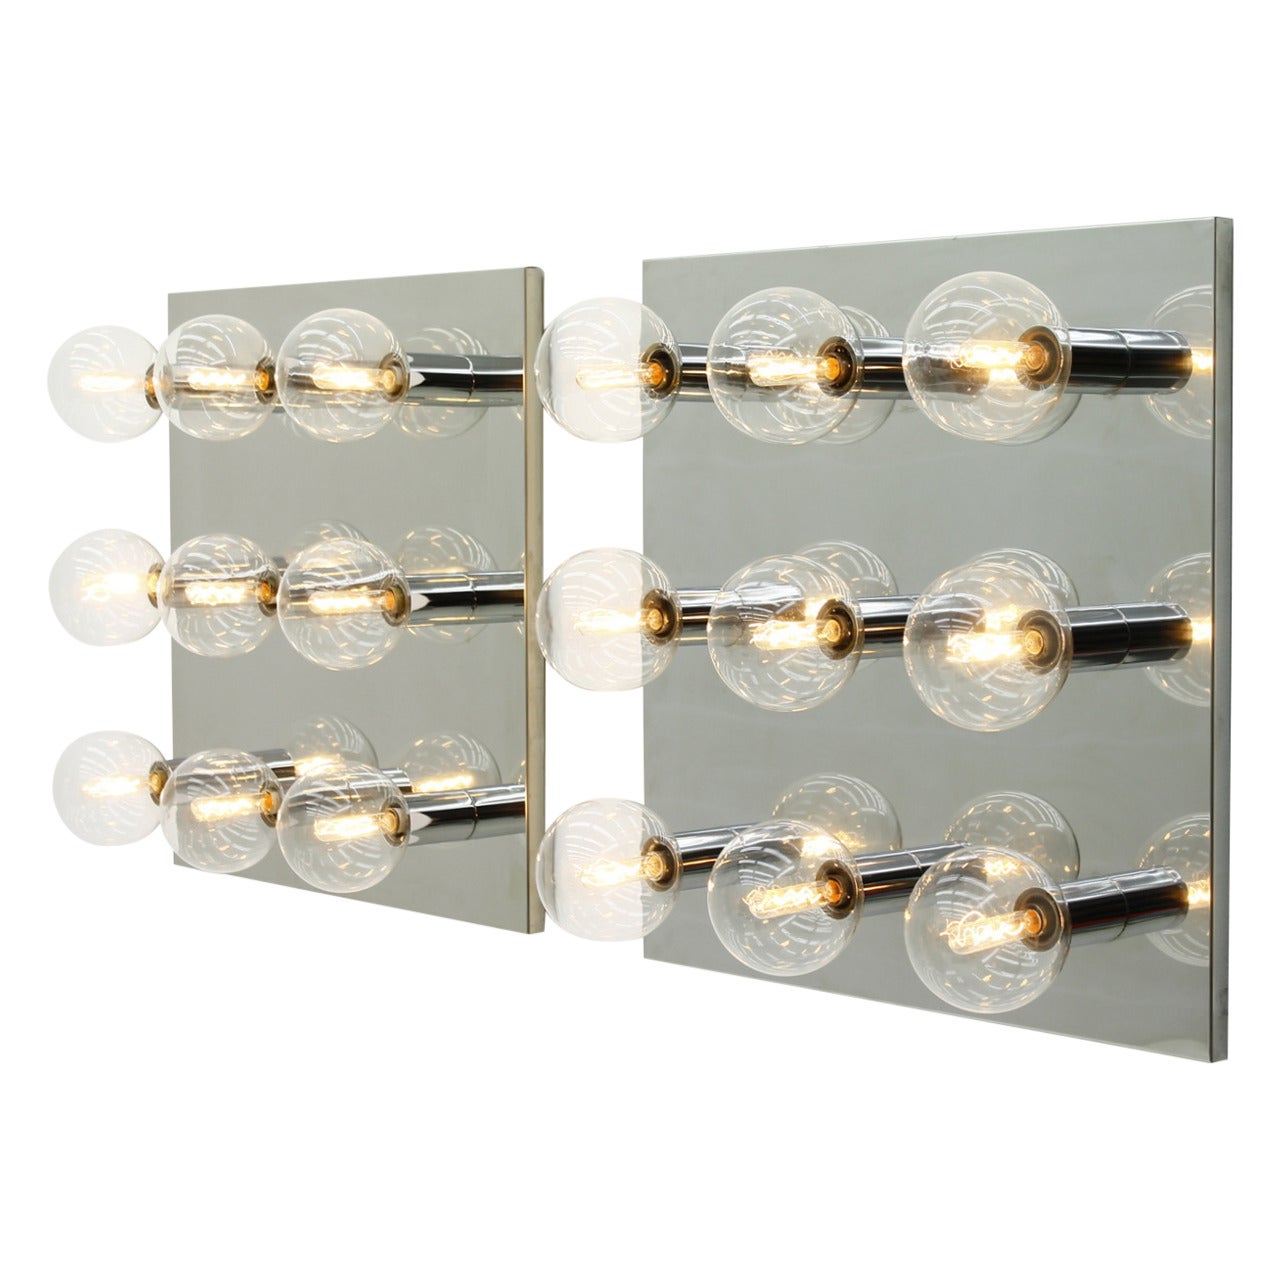 Pair of Motoko Ishii Chrome and Glass Wall Sconces by Staff, 1970s